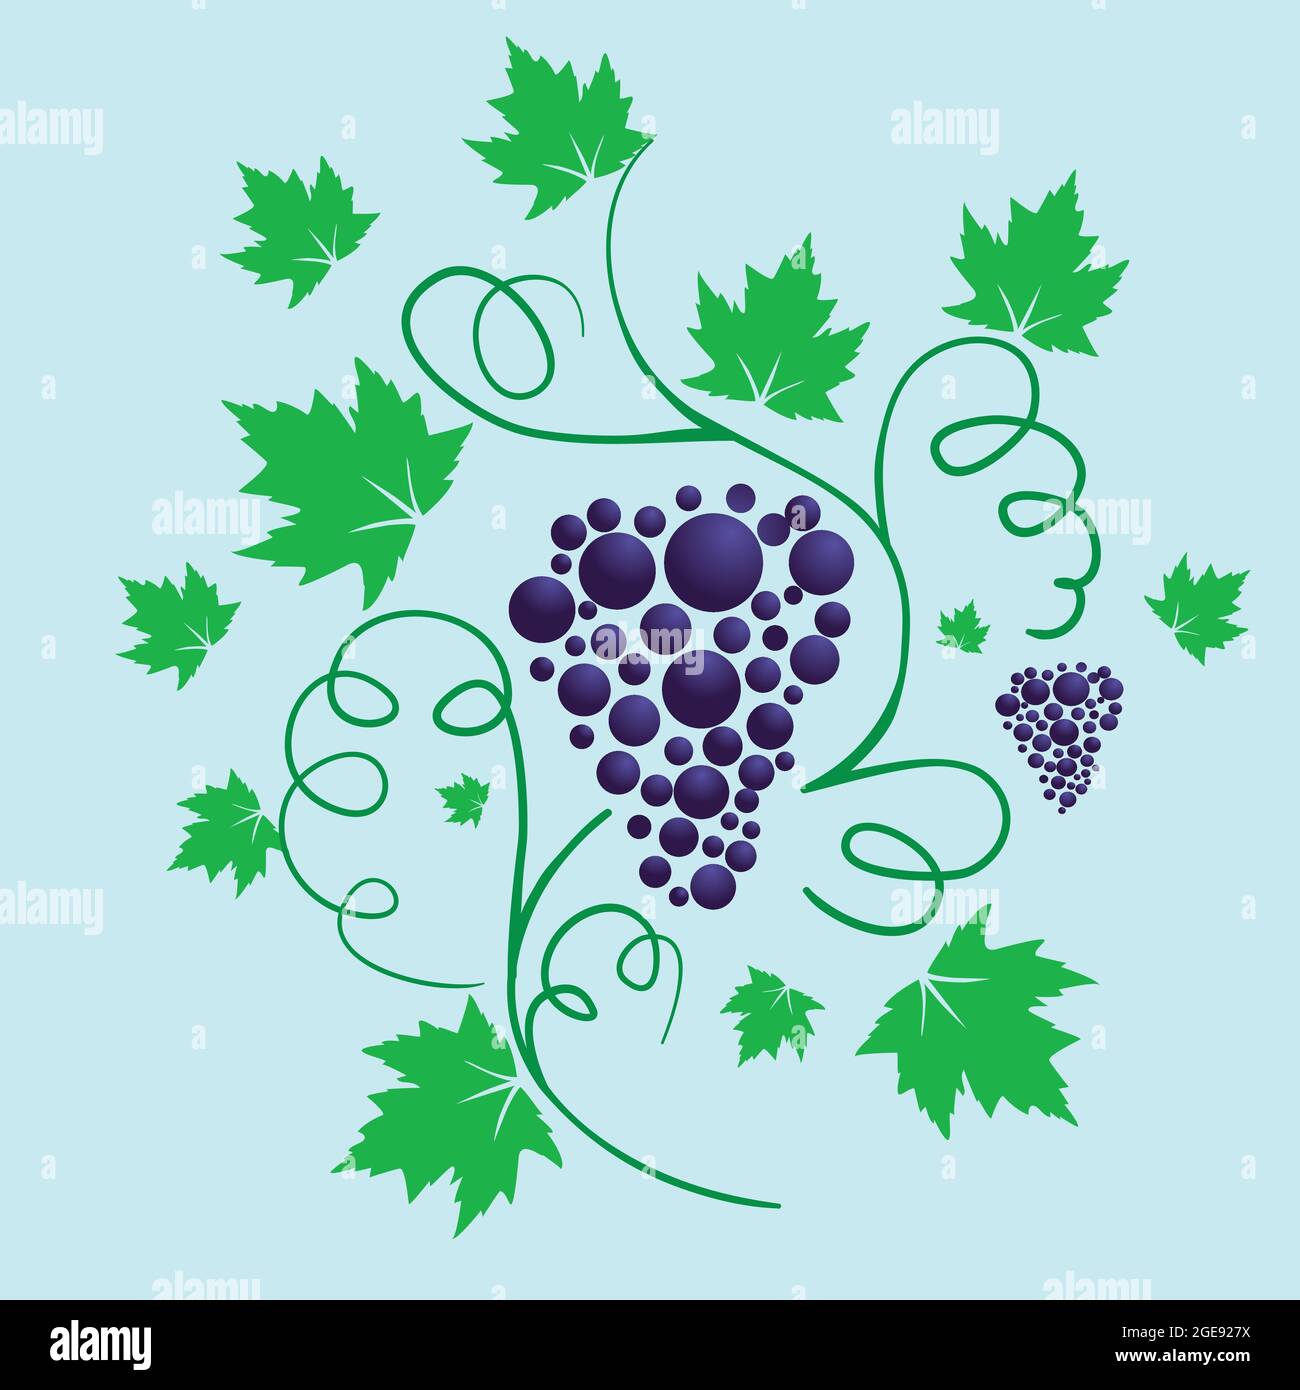 A vector illustration of a grapevine with some leafs and branches. Stock Vector